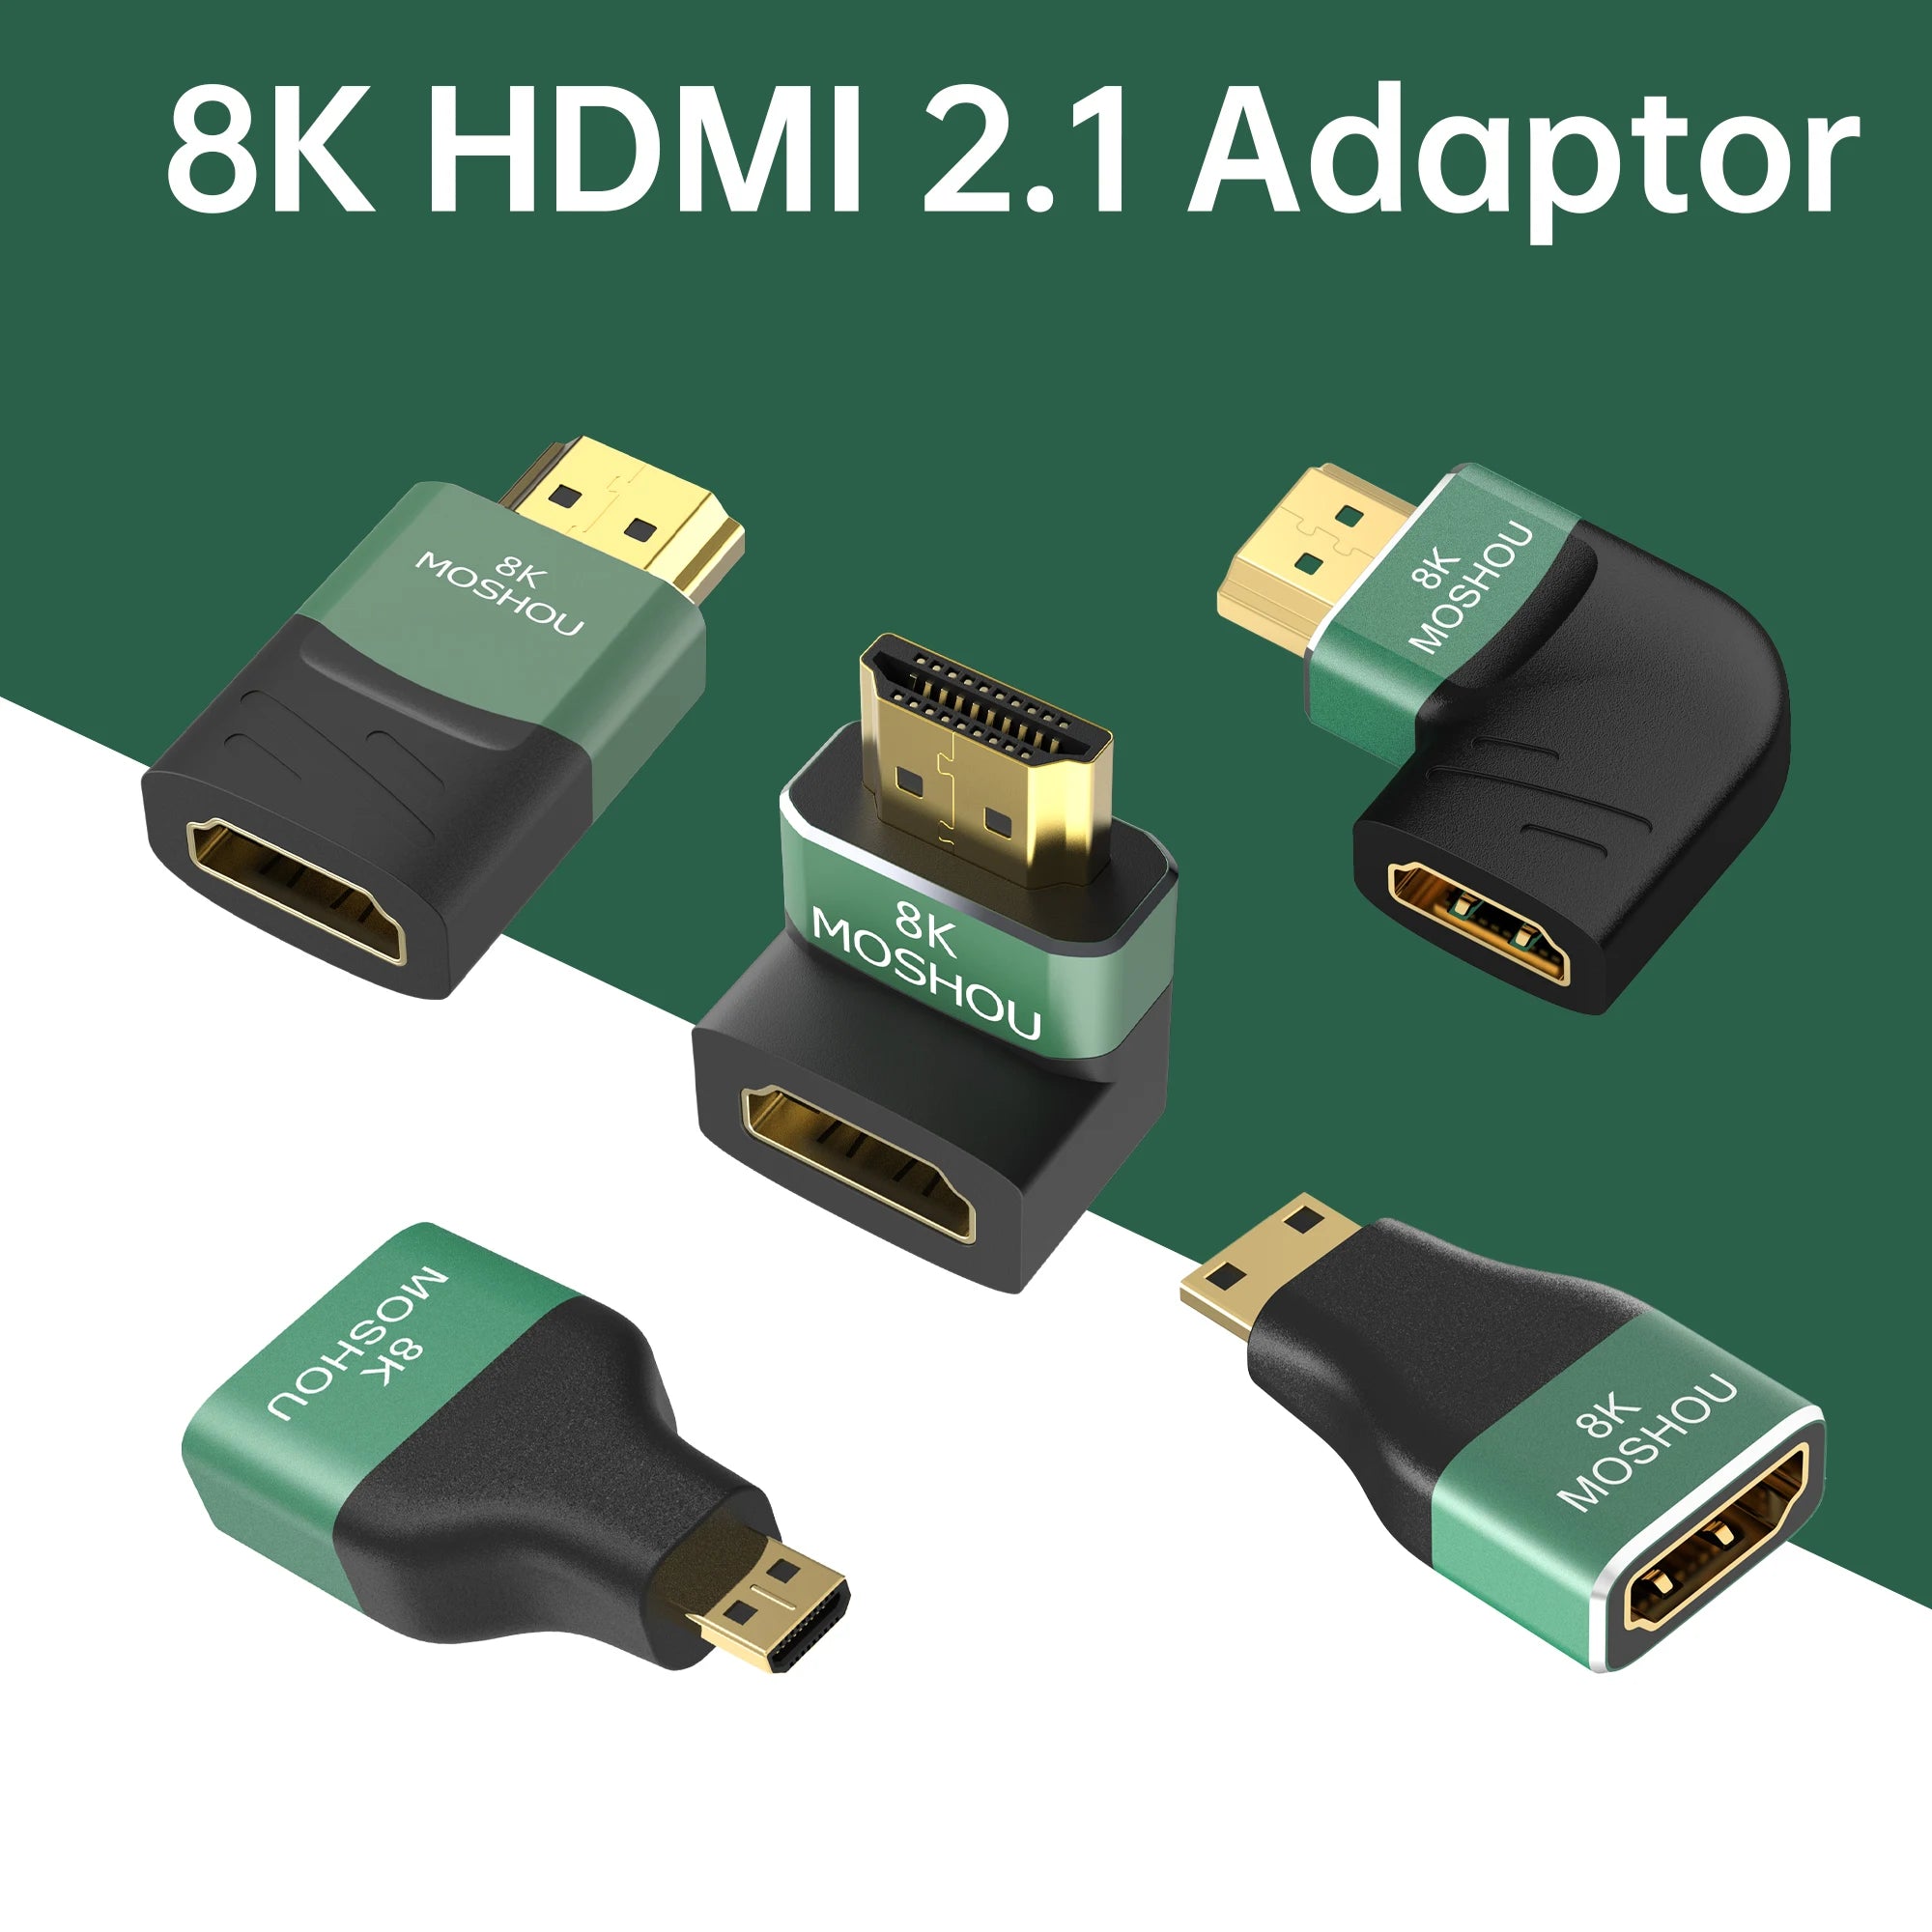 MOSHOU 8K HDMI 2.1 Cable Connector Adapter Angled Plug 2 Pieces Male to Female Converter Cable Adaptor Extender Right-angle Plug SIKAI CASE